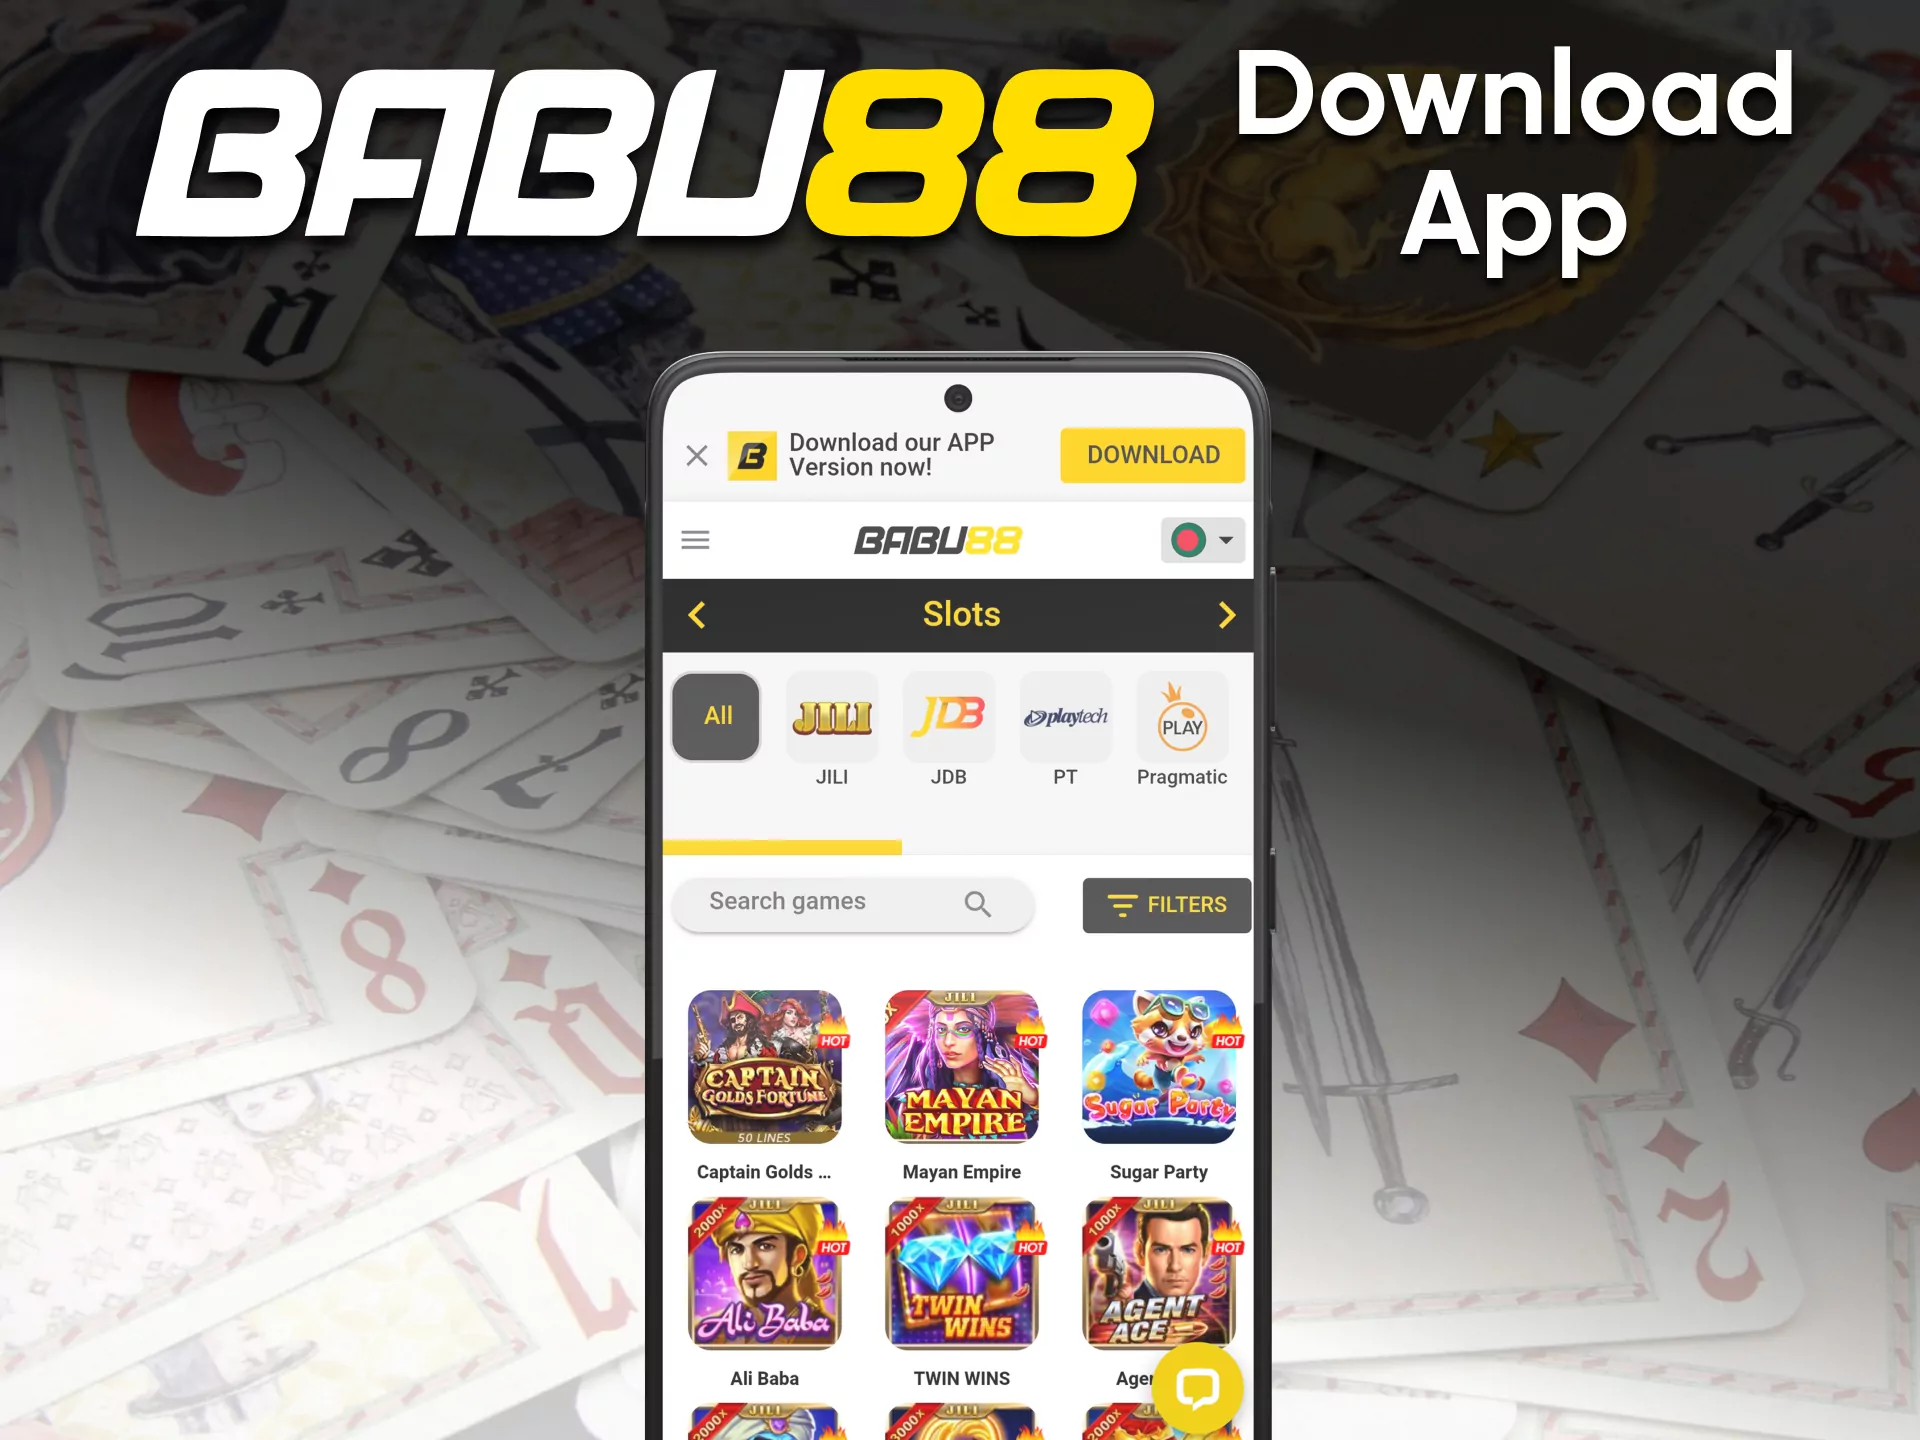 For games at the Babu88 casino, you can use the application.